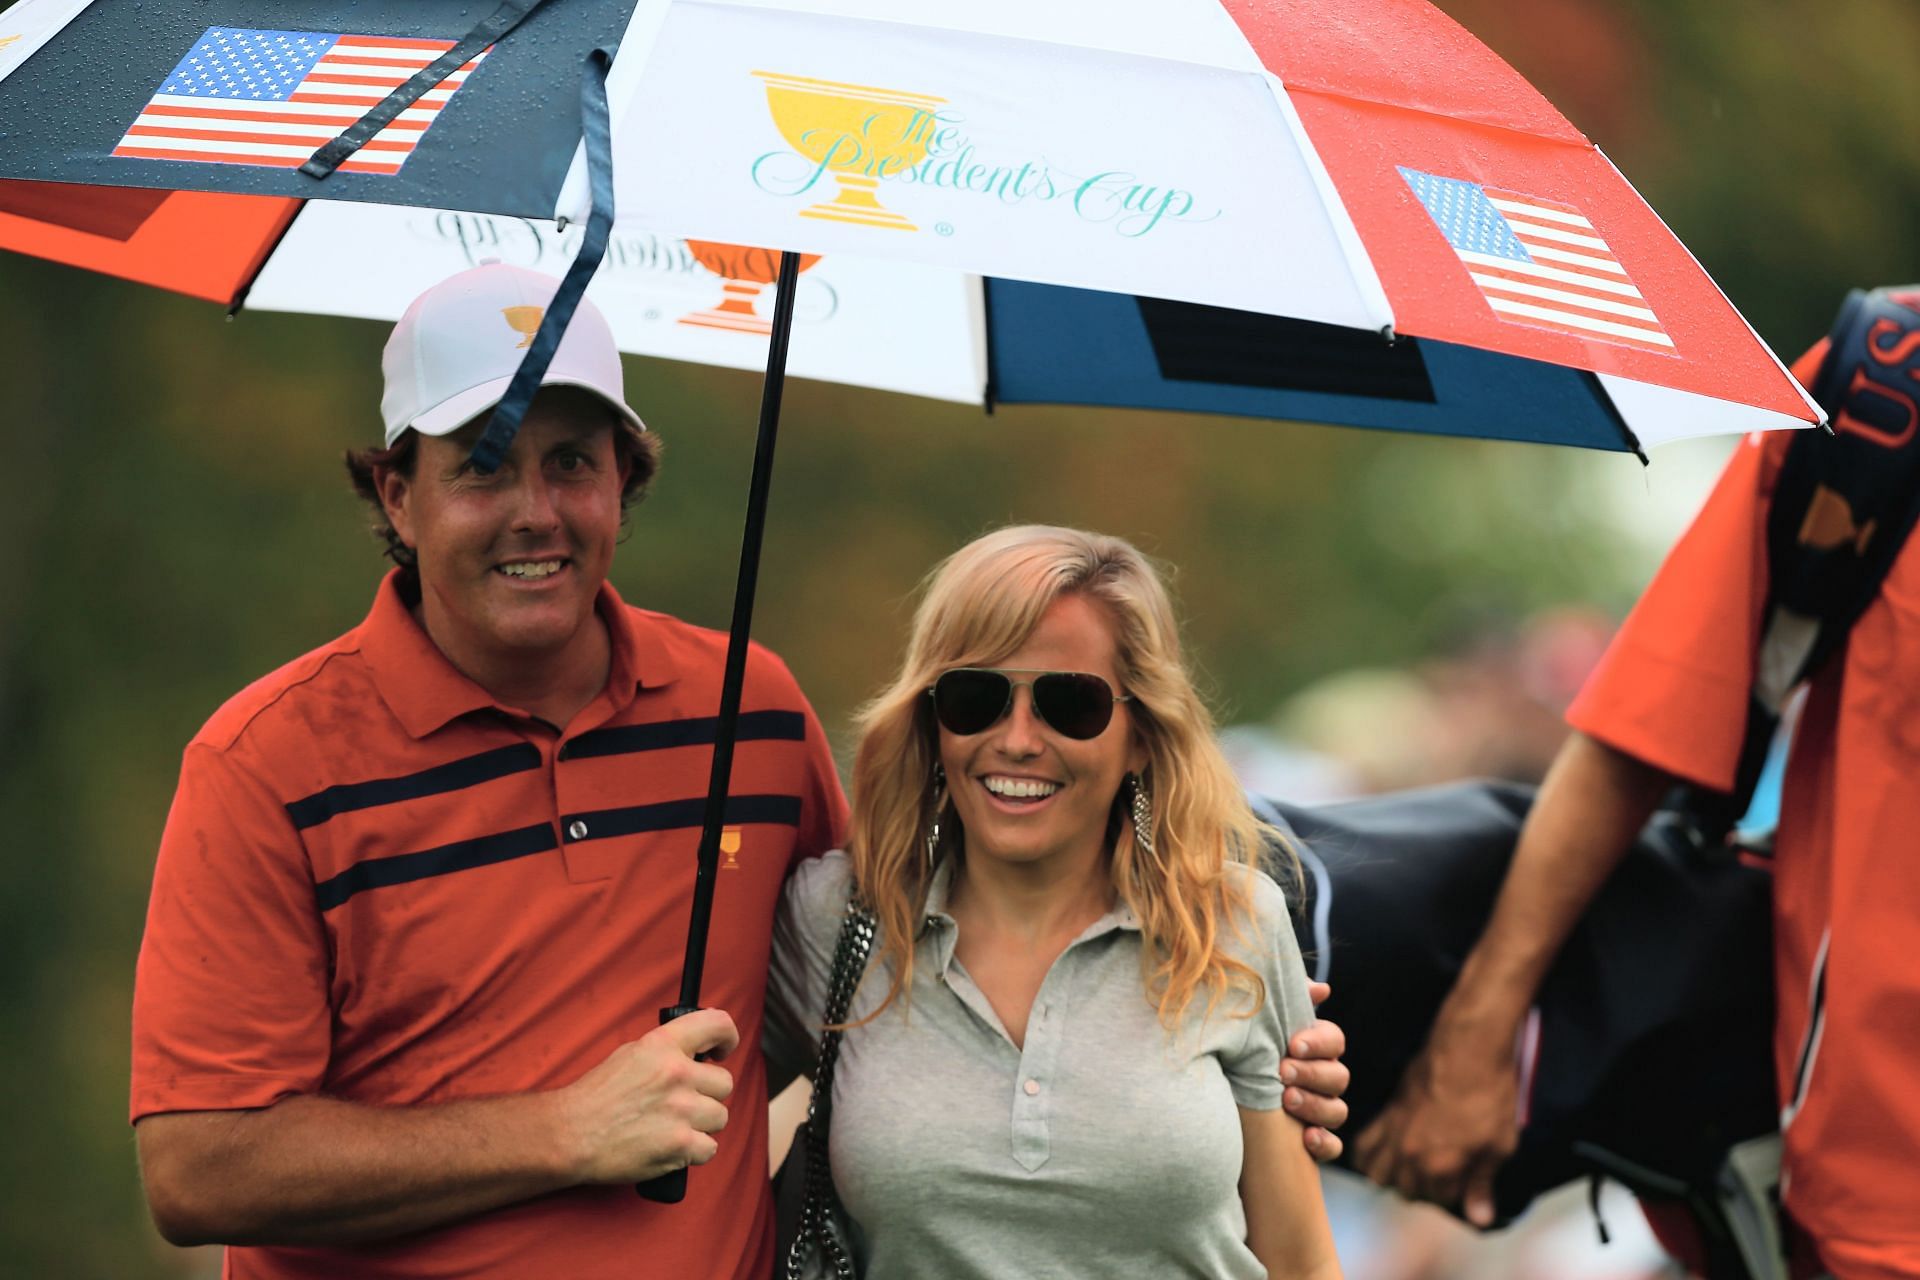 Amy and Phil Mickelson during The Presidents Cup, 2013 (Image via Getty).